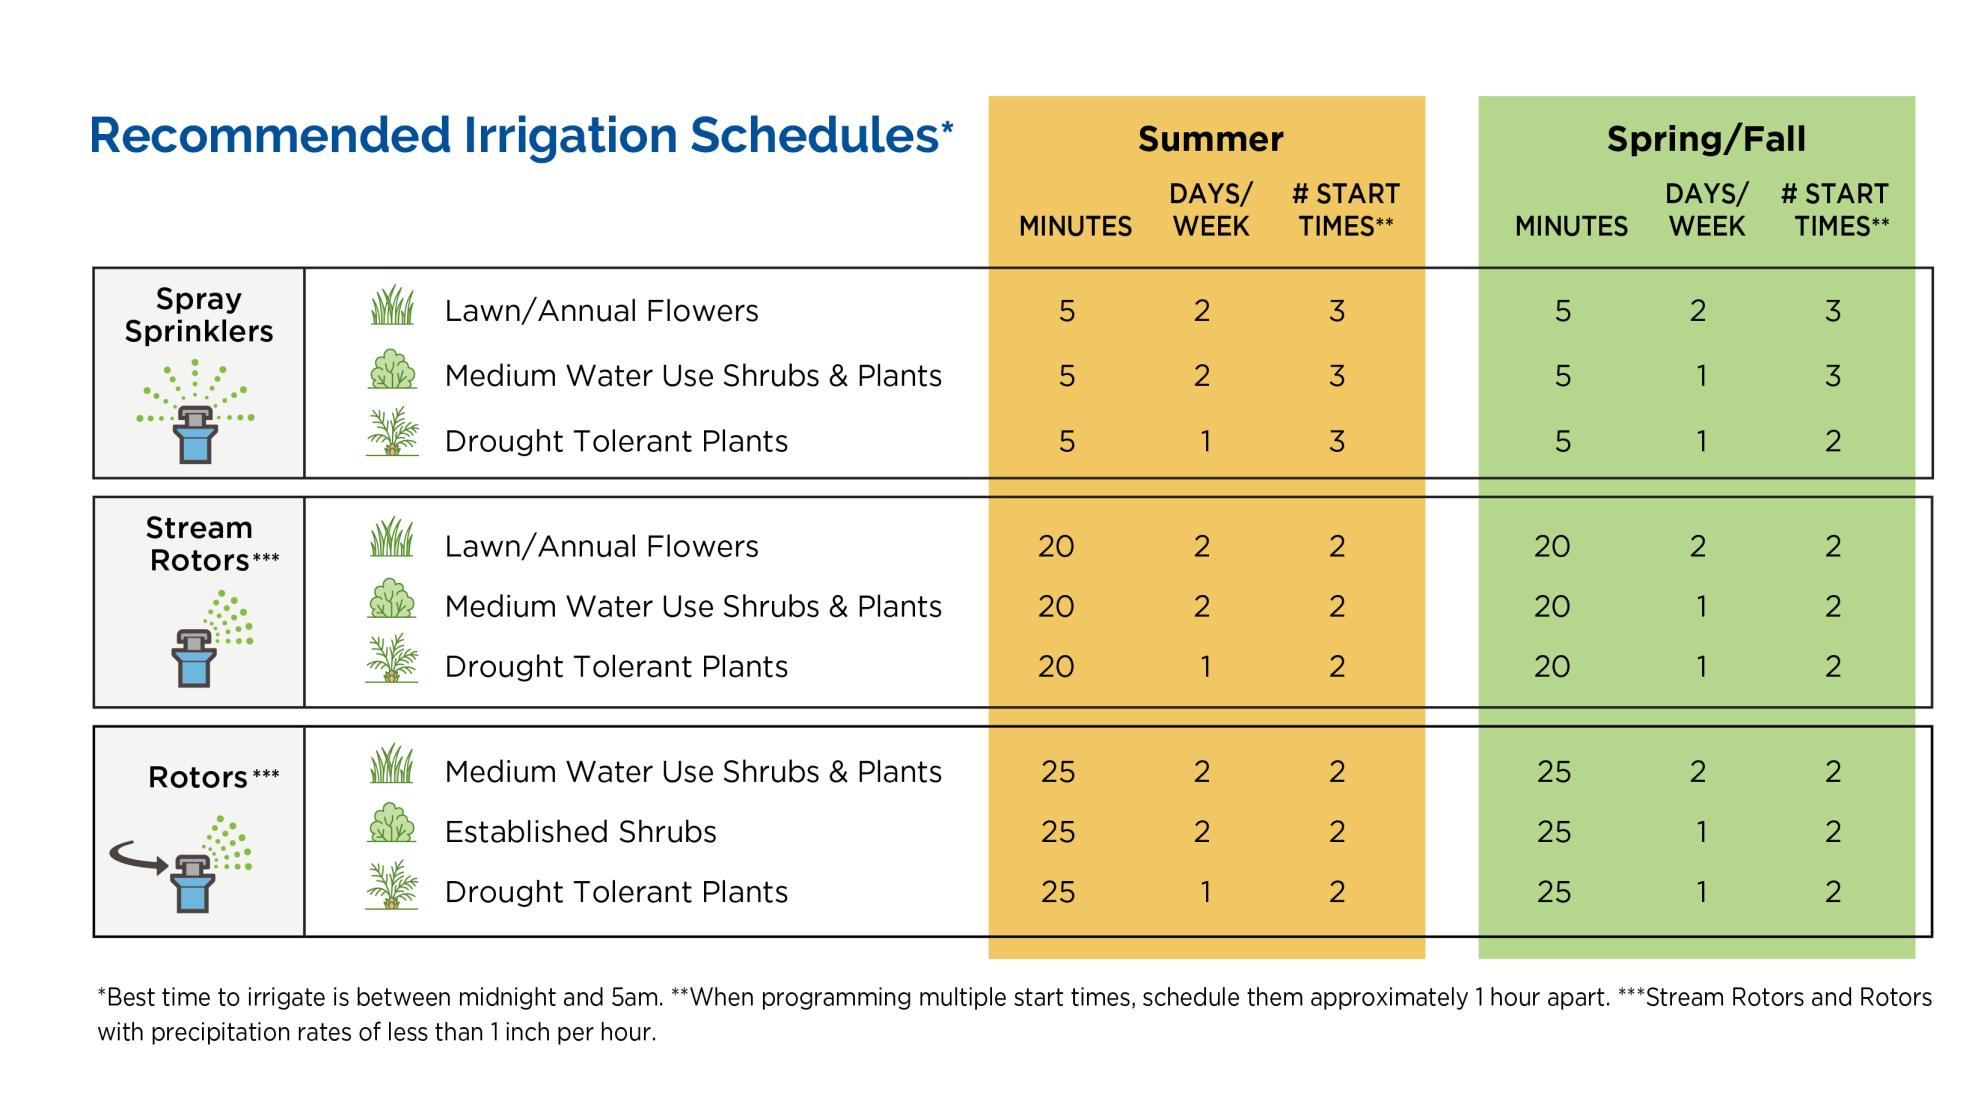 Table showing recommended irrigation schedule